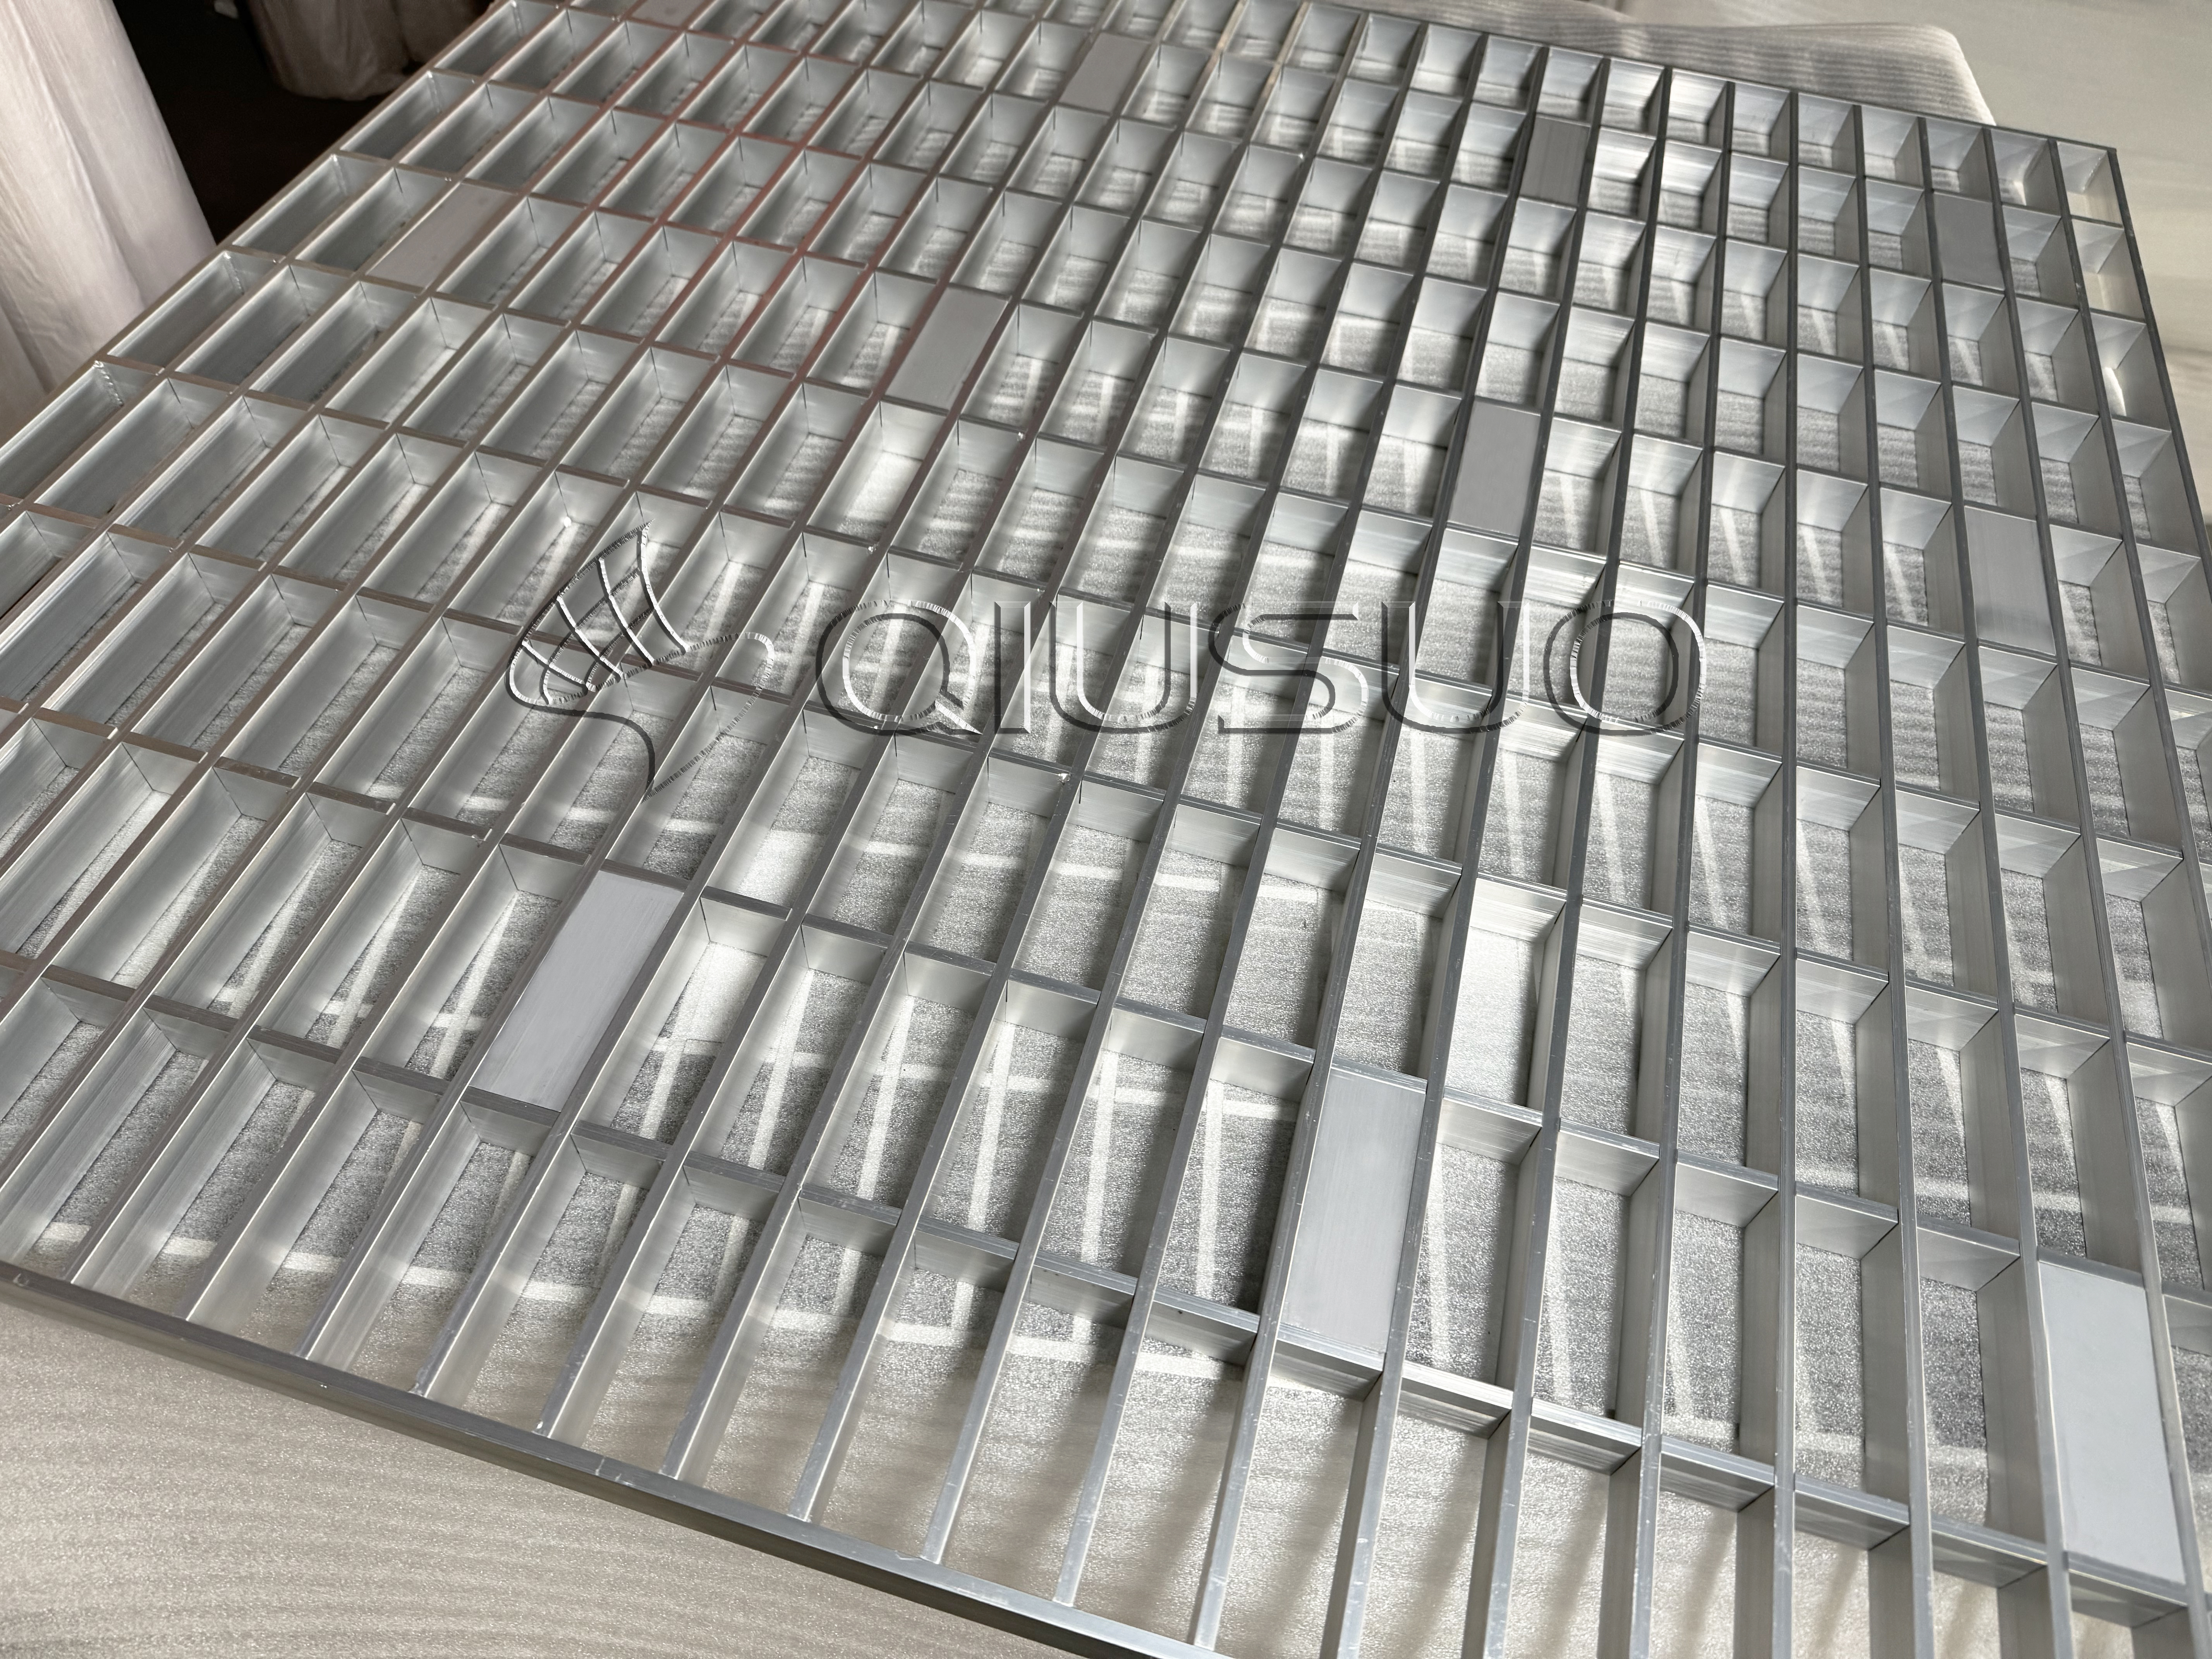 This is a photo of using drawings to check aluminum-grating specifications.